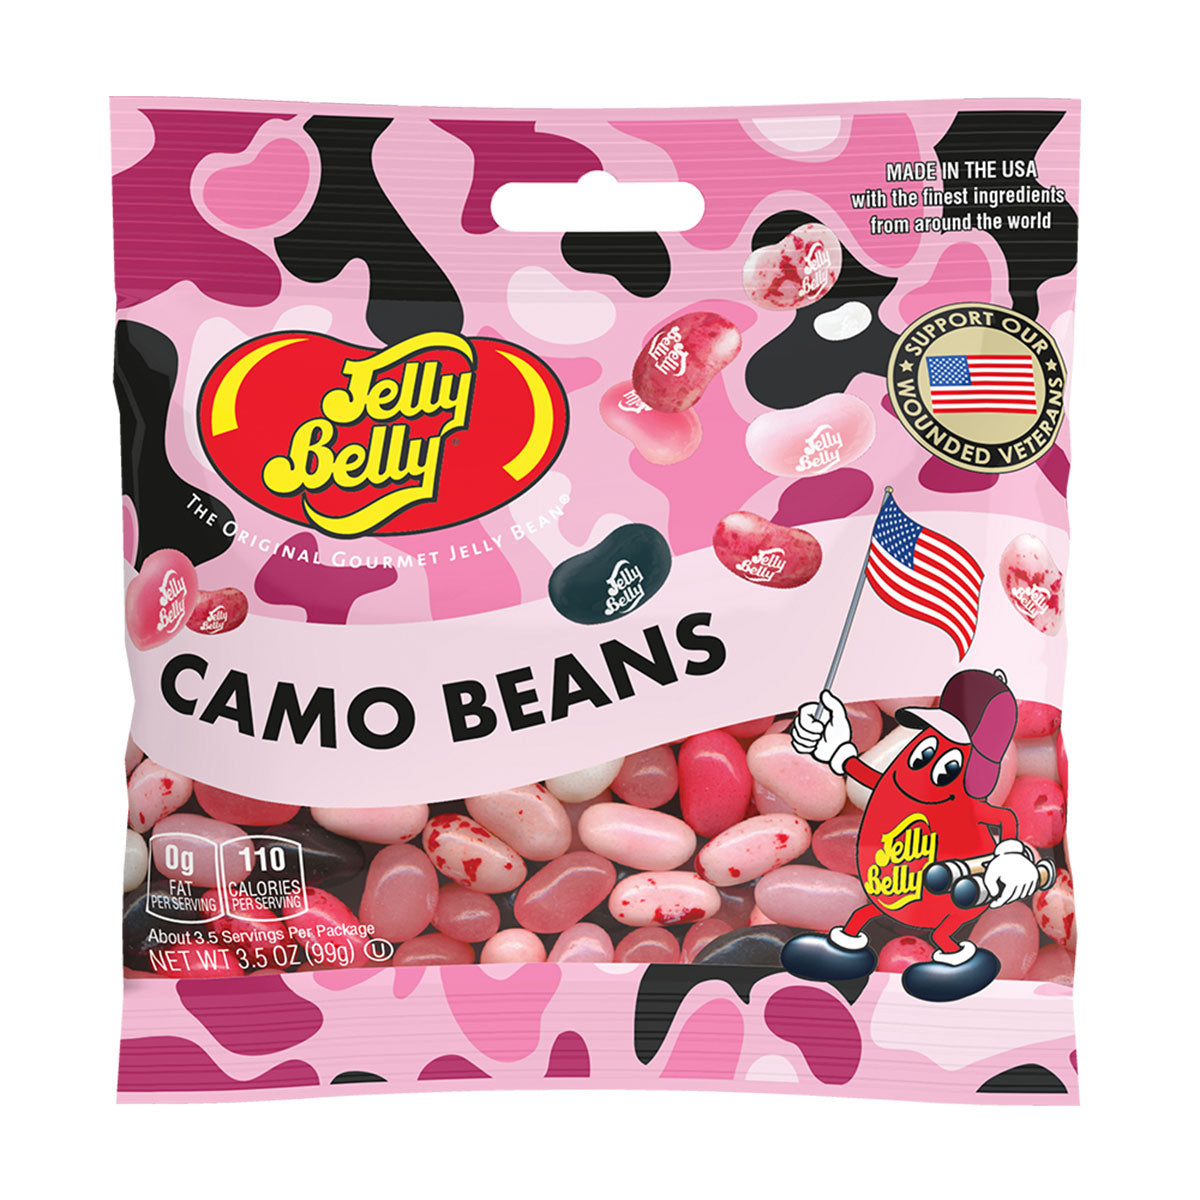 Pink Camo Beans Jelly Belly Bag Cover